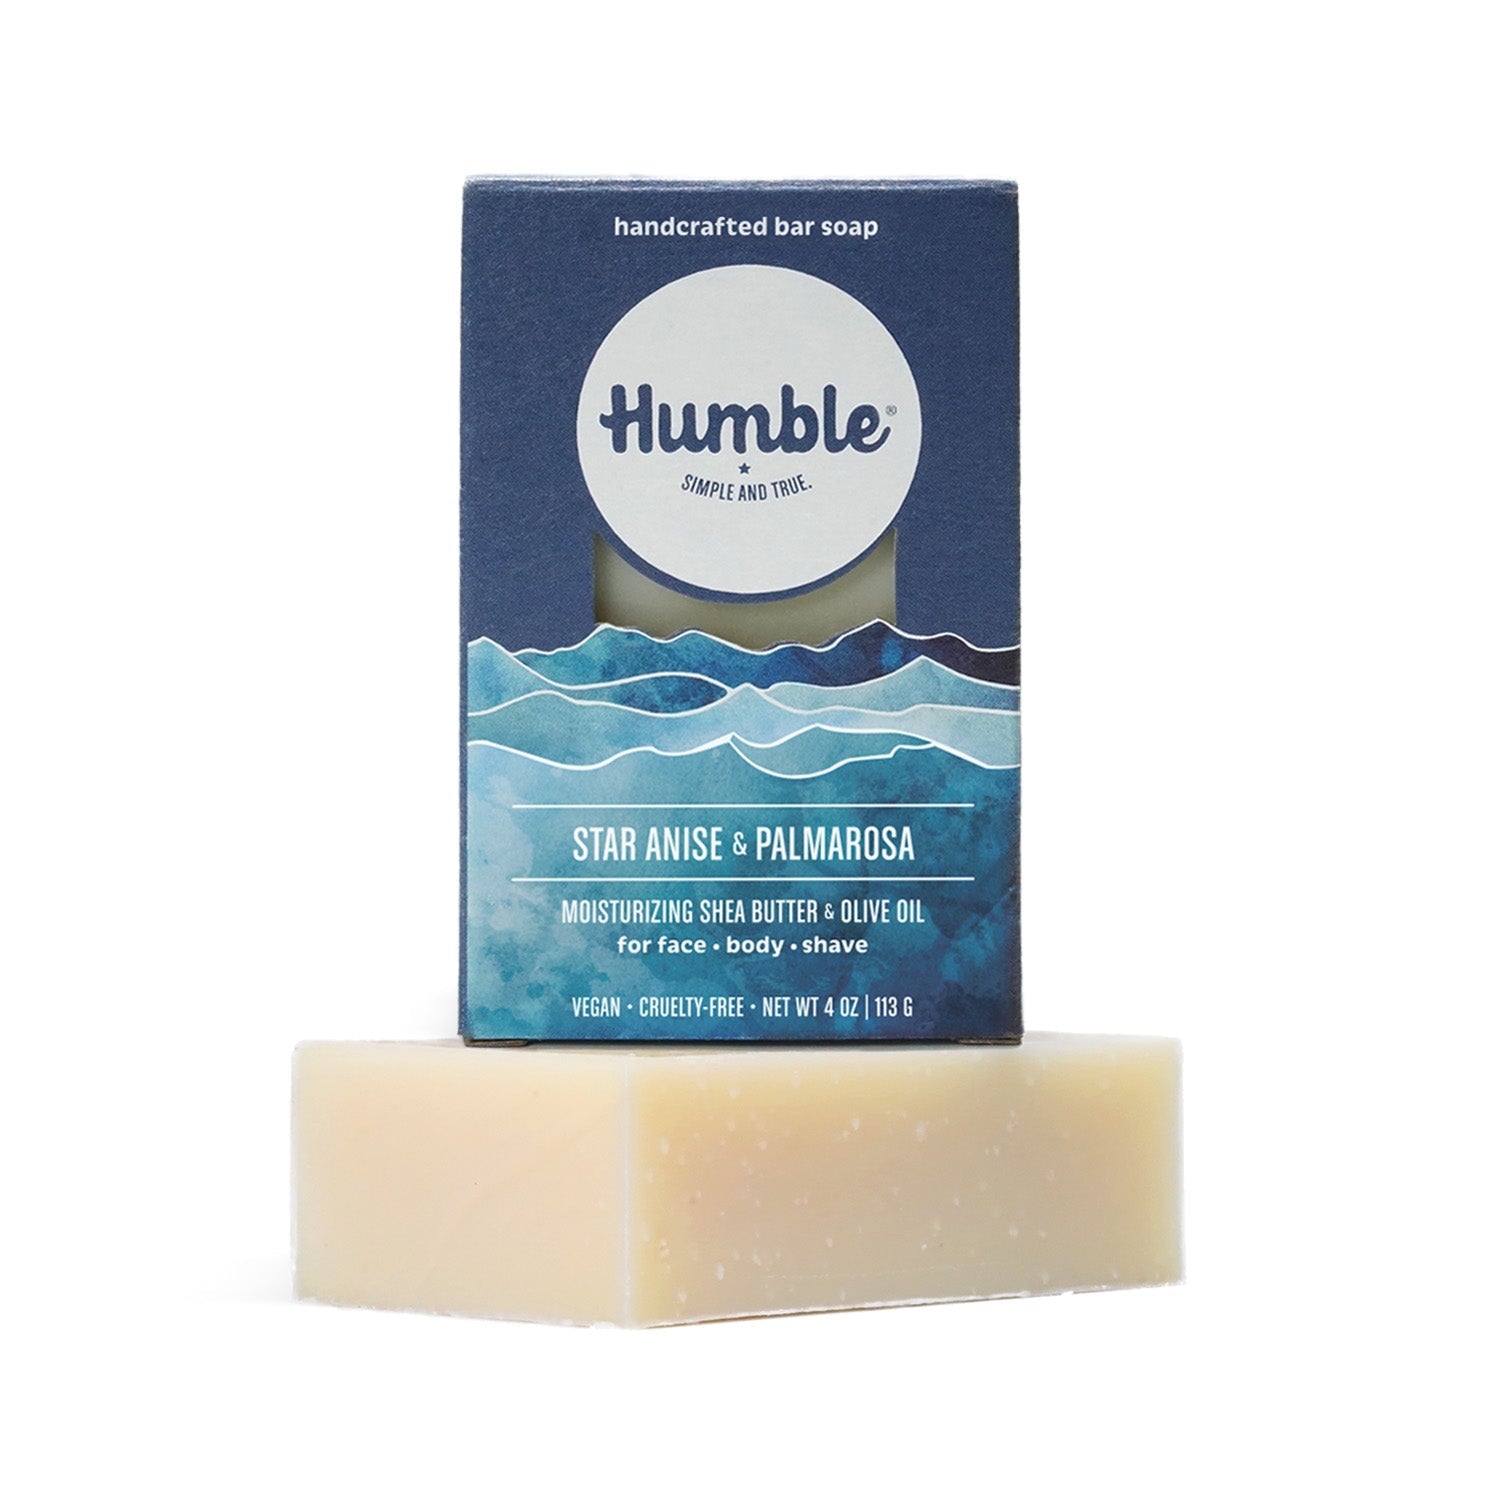 Humble Eco Friendly Cleansing Bar - Star Anise & Palmarosa